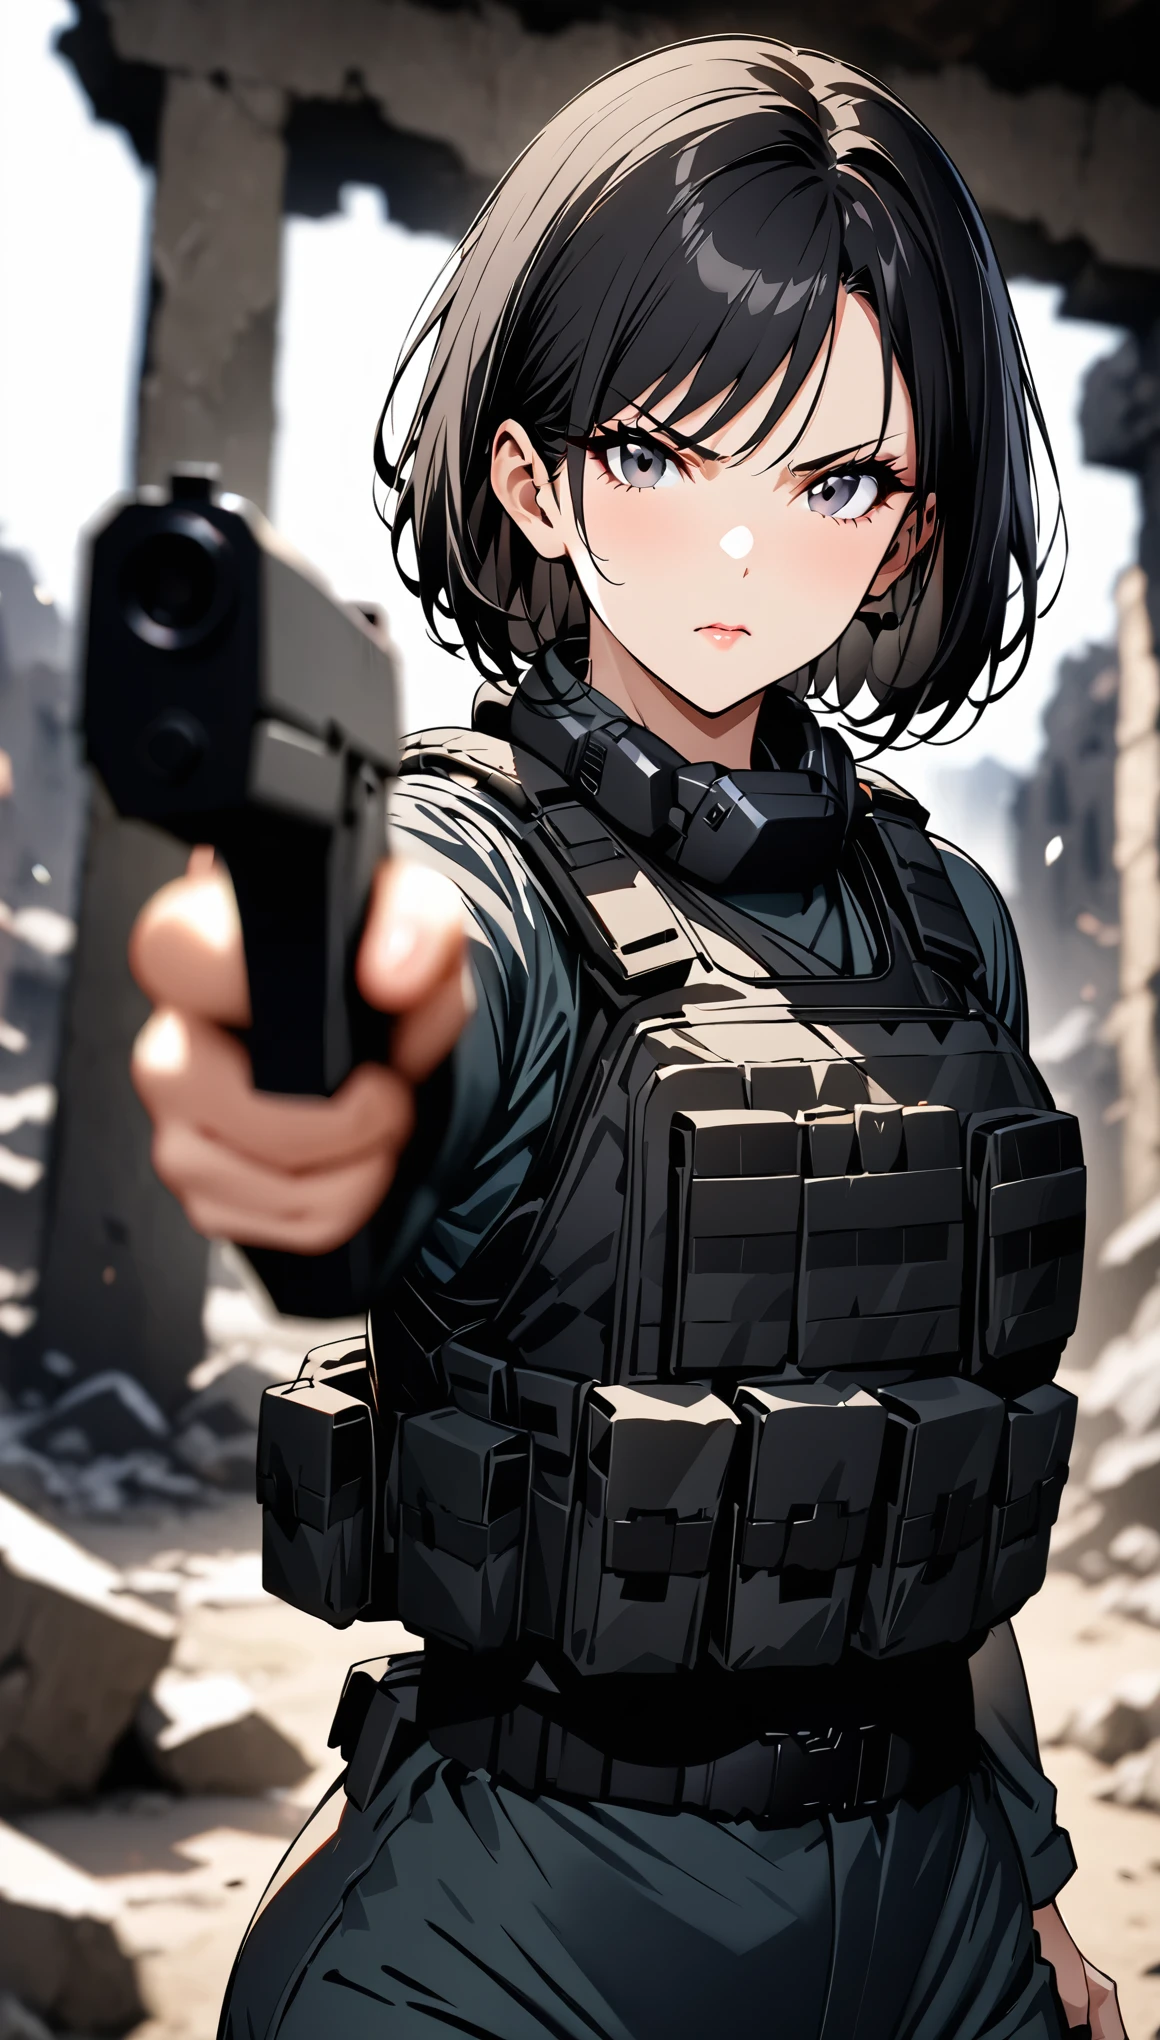 ((masterpiece)),((highest quality)),((High resolution)),((Very detailed)),One woman,48 years old,Mature Woman,Japanese,Black Hair,Short Bob,Beautiful Eyes,Long eyelashes,Beautiful Hair,Beautiful Skin,Serious,BREAK(((pointing pistol))),Handgun,SWAT Uniforms,black bulletproof vest, Combat Boots, Black Tactical Forster,Tactical Headset,((Dark ruins in the background)),(((Background Blur)))